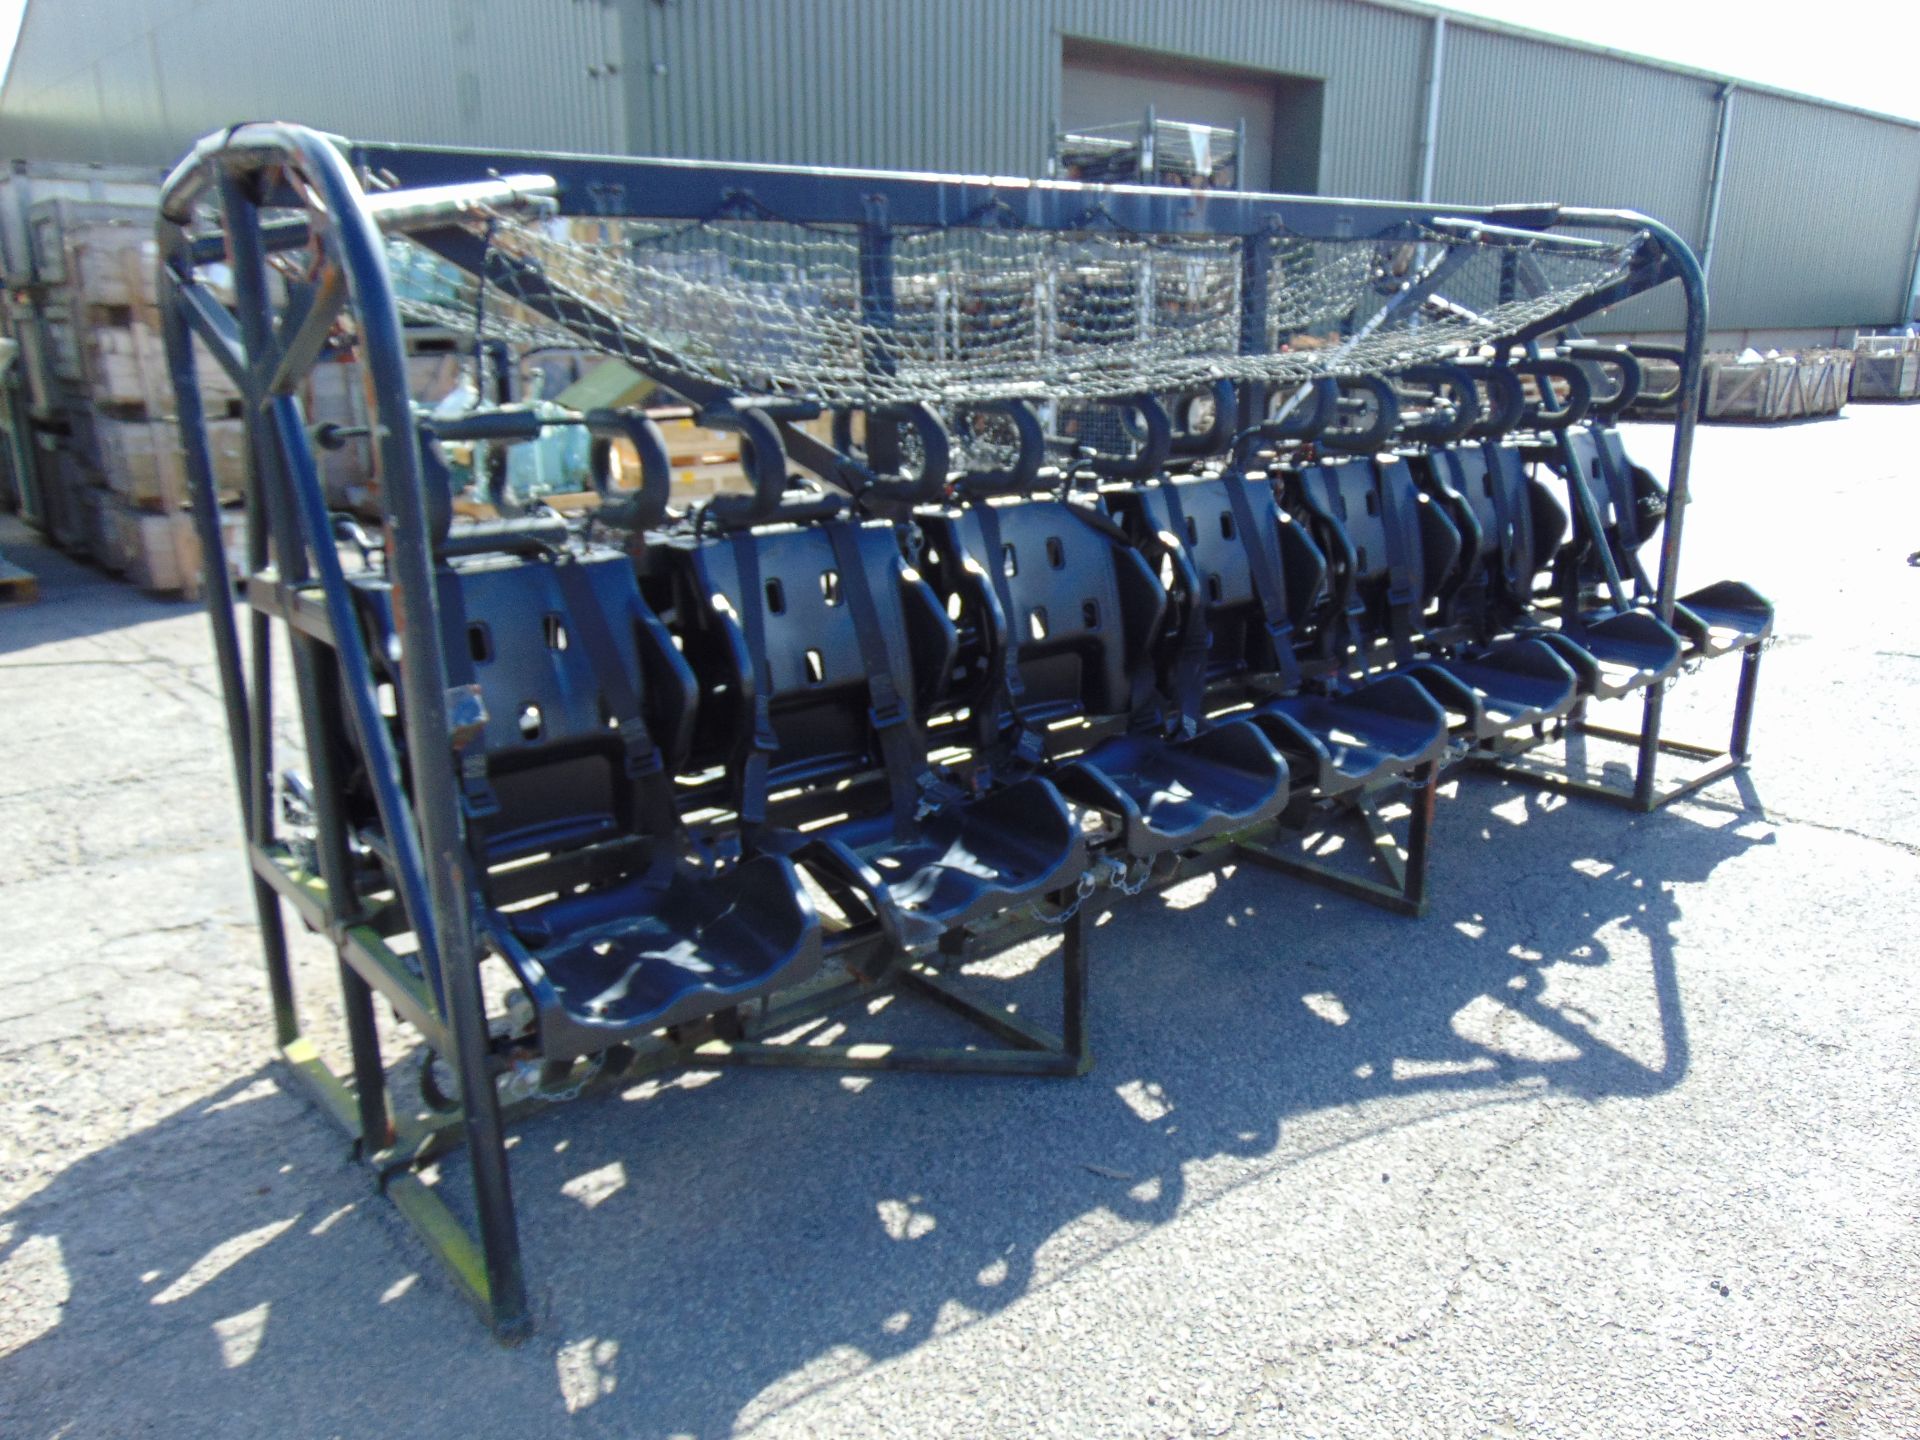 14 Man Security Seat suitable for Leyland Dafs, Bedfords etc - Image 5 of 8